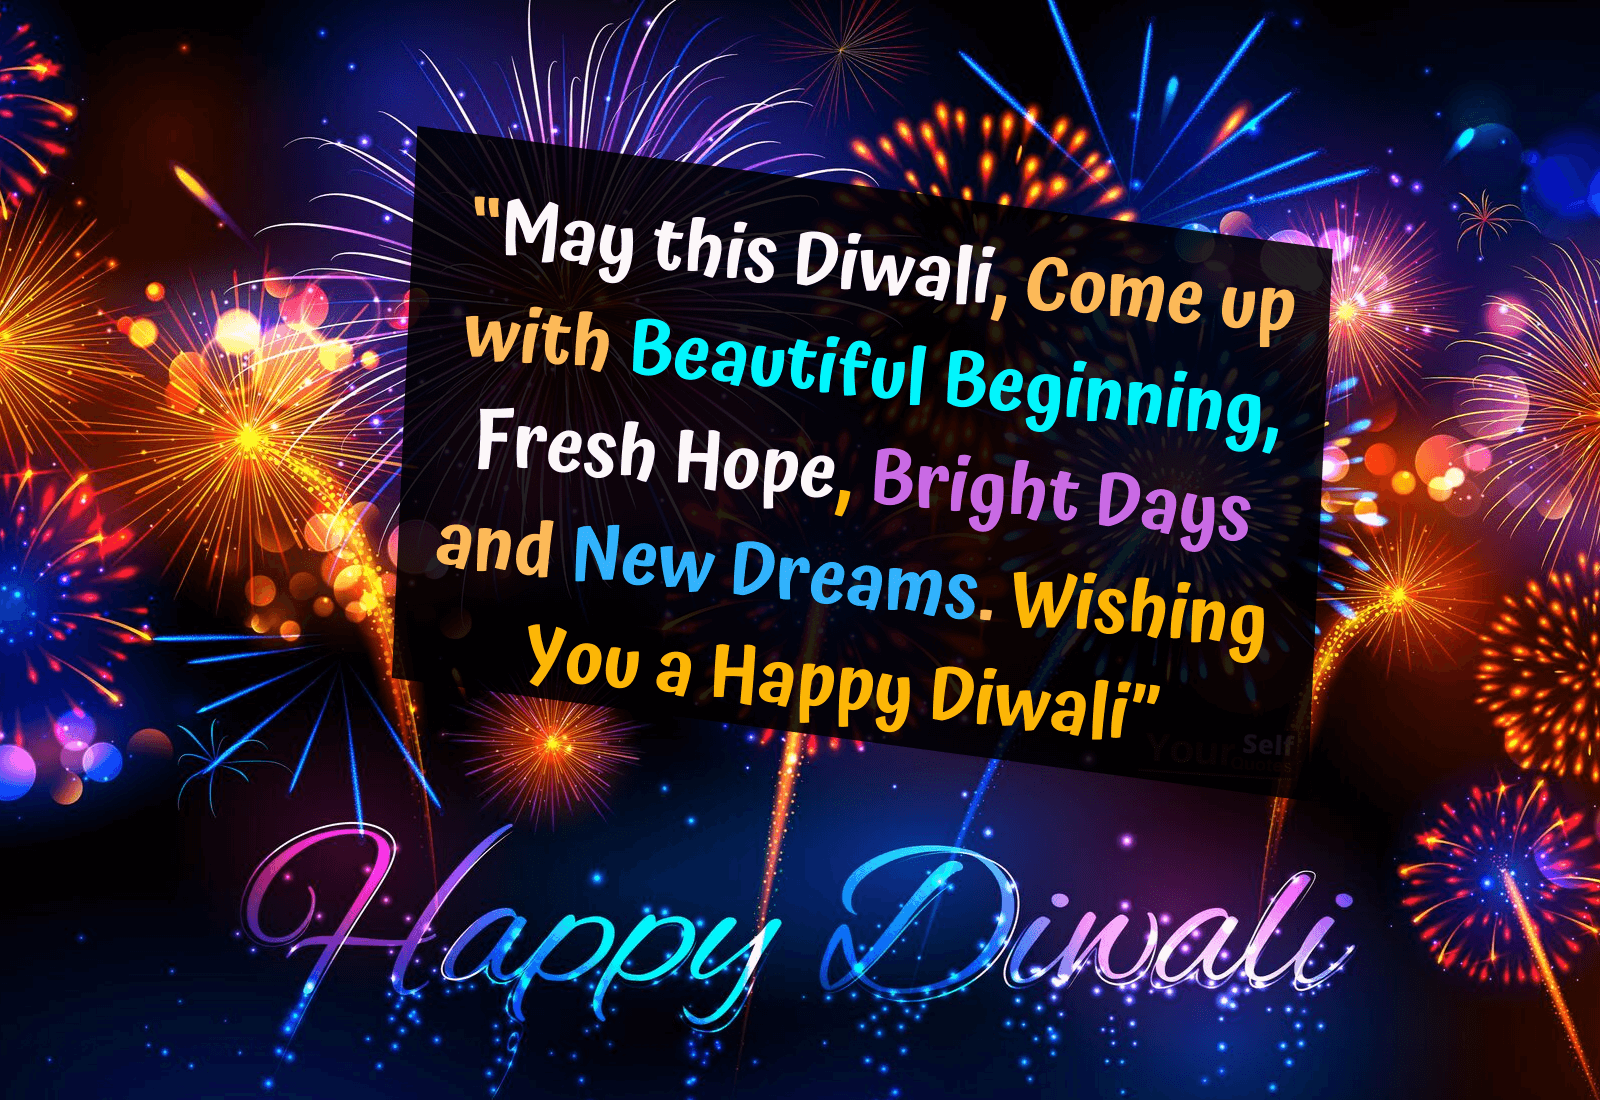 may this diwali, come up with beautiful beginning, fresh hope, bright days and new dreams. wishing you a happy diwali